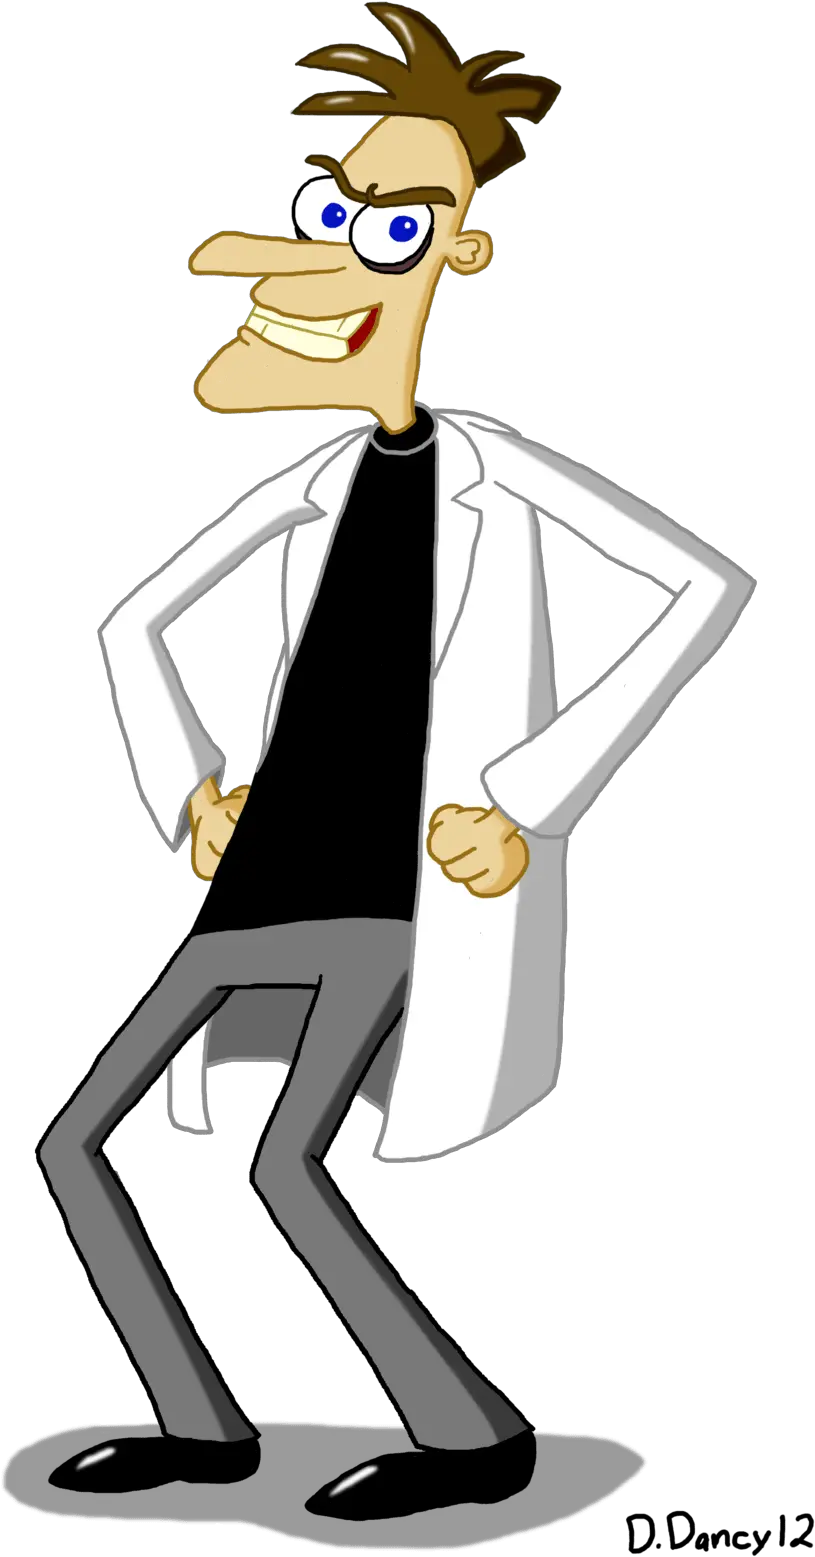 Record A Message In Doofenshmirtz Voice From Phineas And Ferb Phineas And Ferb Dr Doofenshmirtz Png Phineas And Ferb Logo